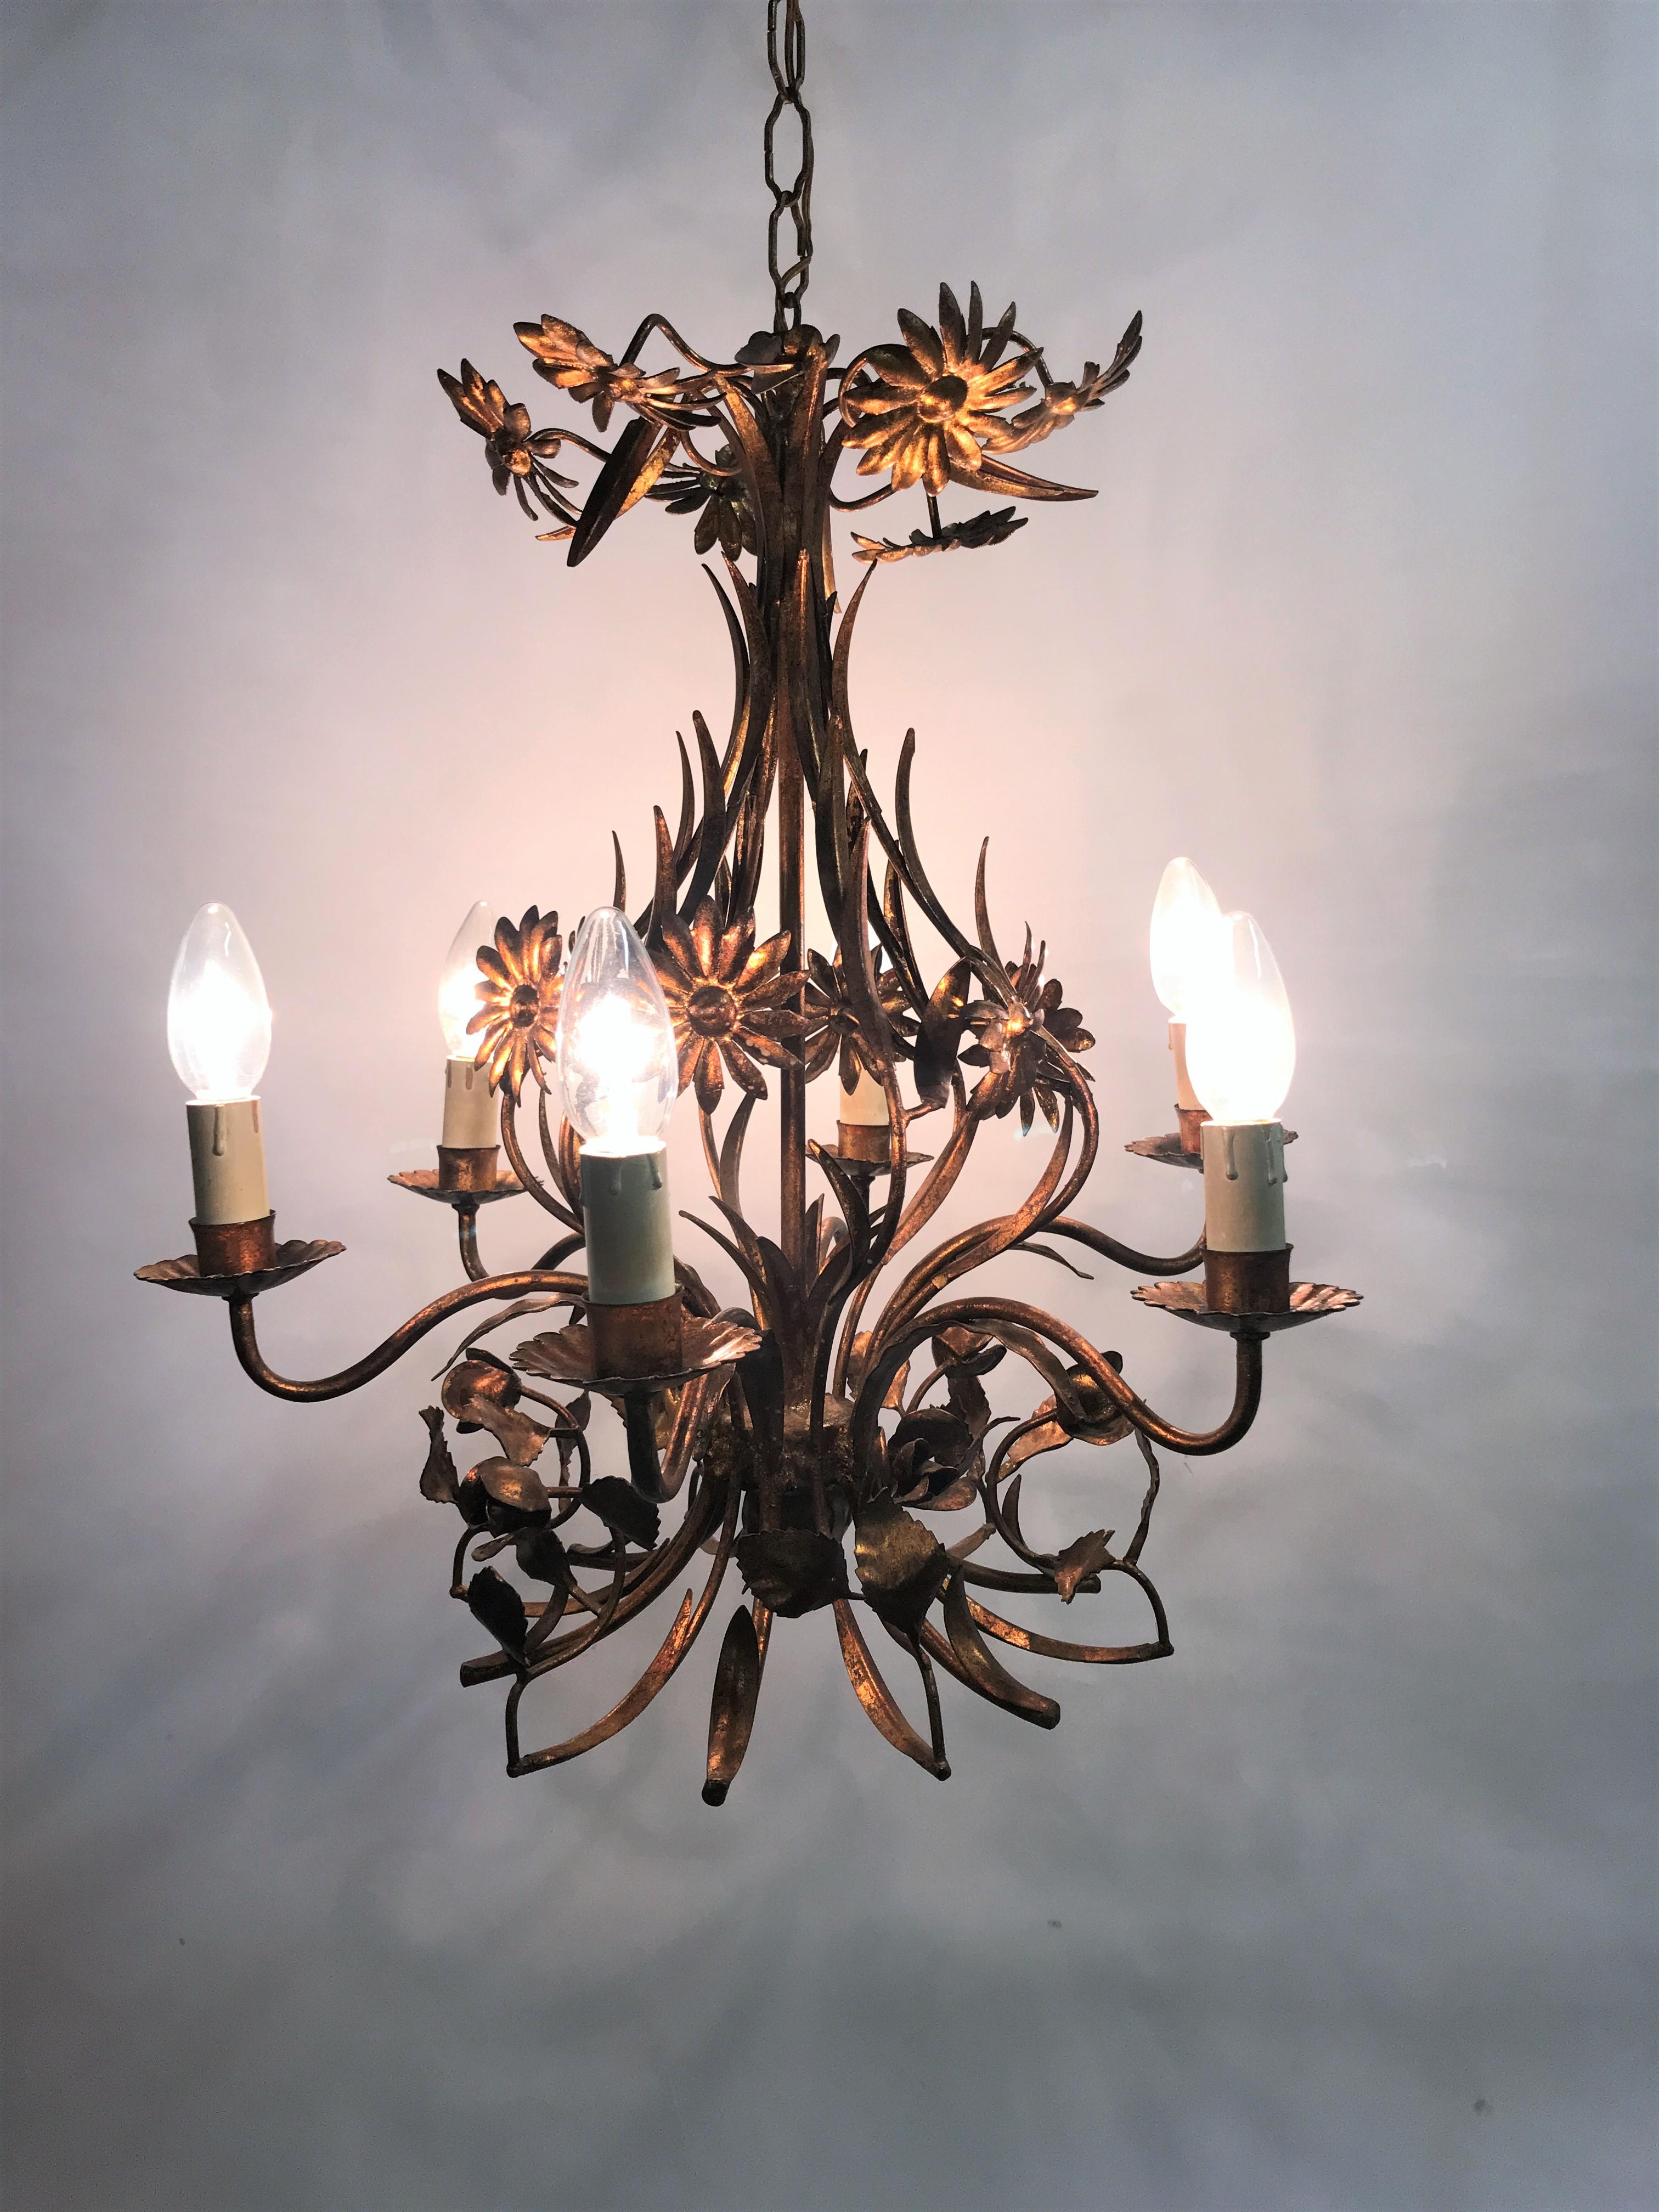 midcentury 5 lightpoint candle chandelier.

This gilt metal flower chandelier was made in Italy and is beautifully decorated with flowers and leaves giving it a very charming look.

1950s - Italy

Tested and ready to use with regular E14